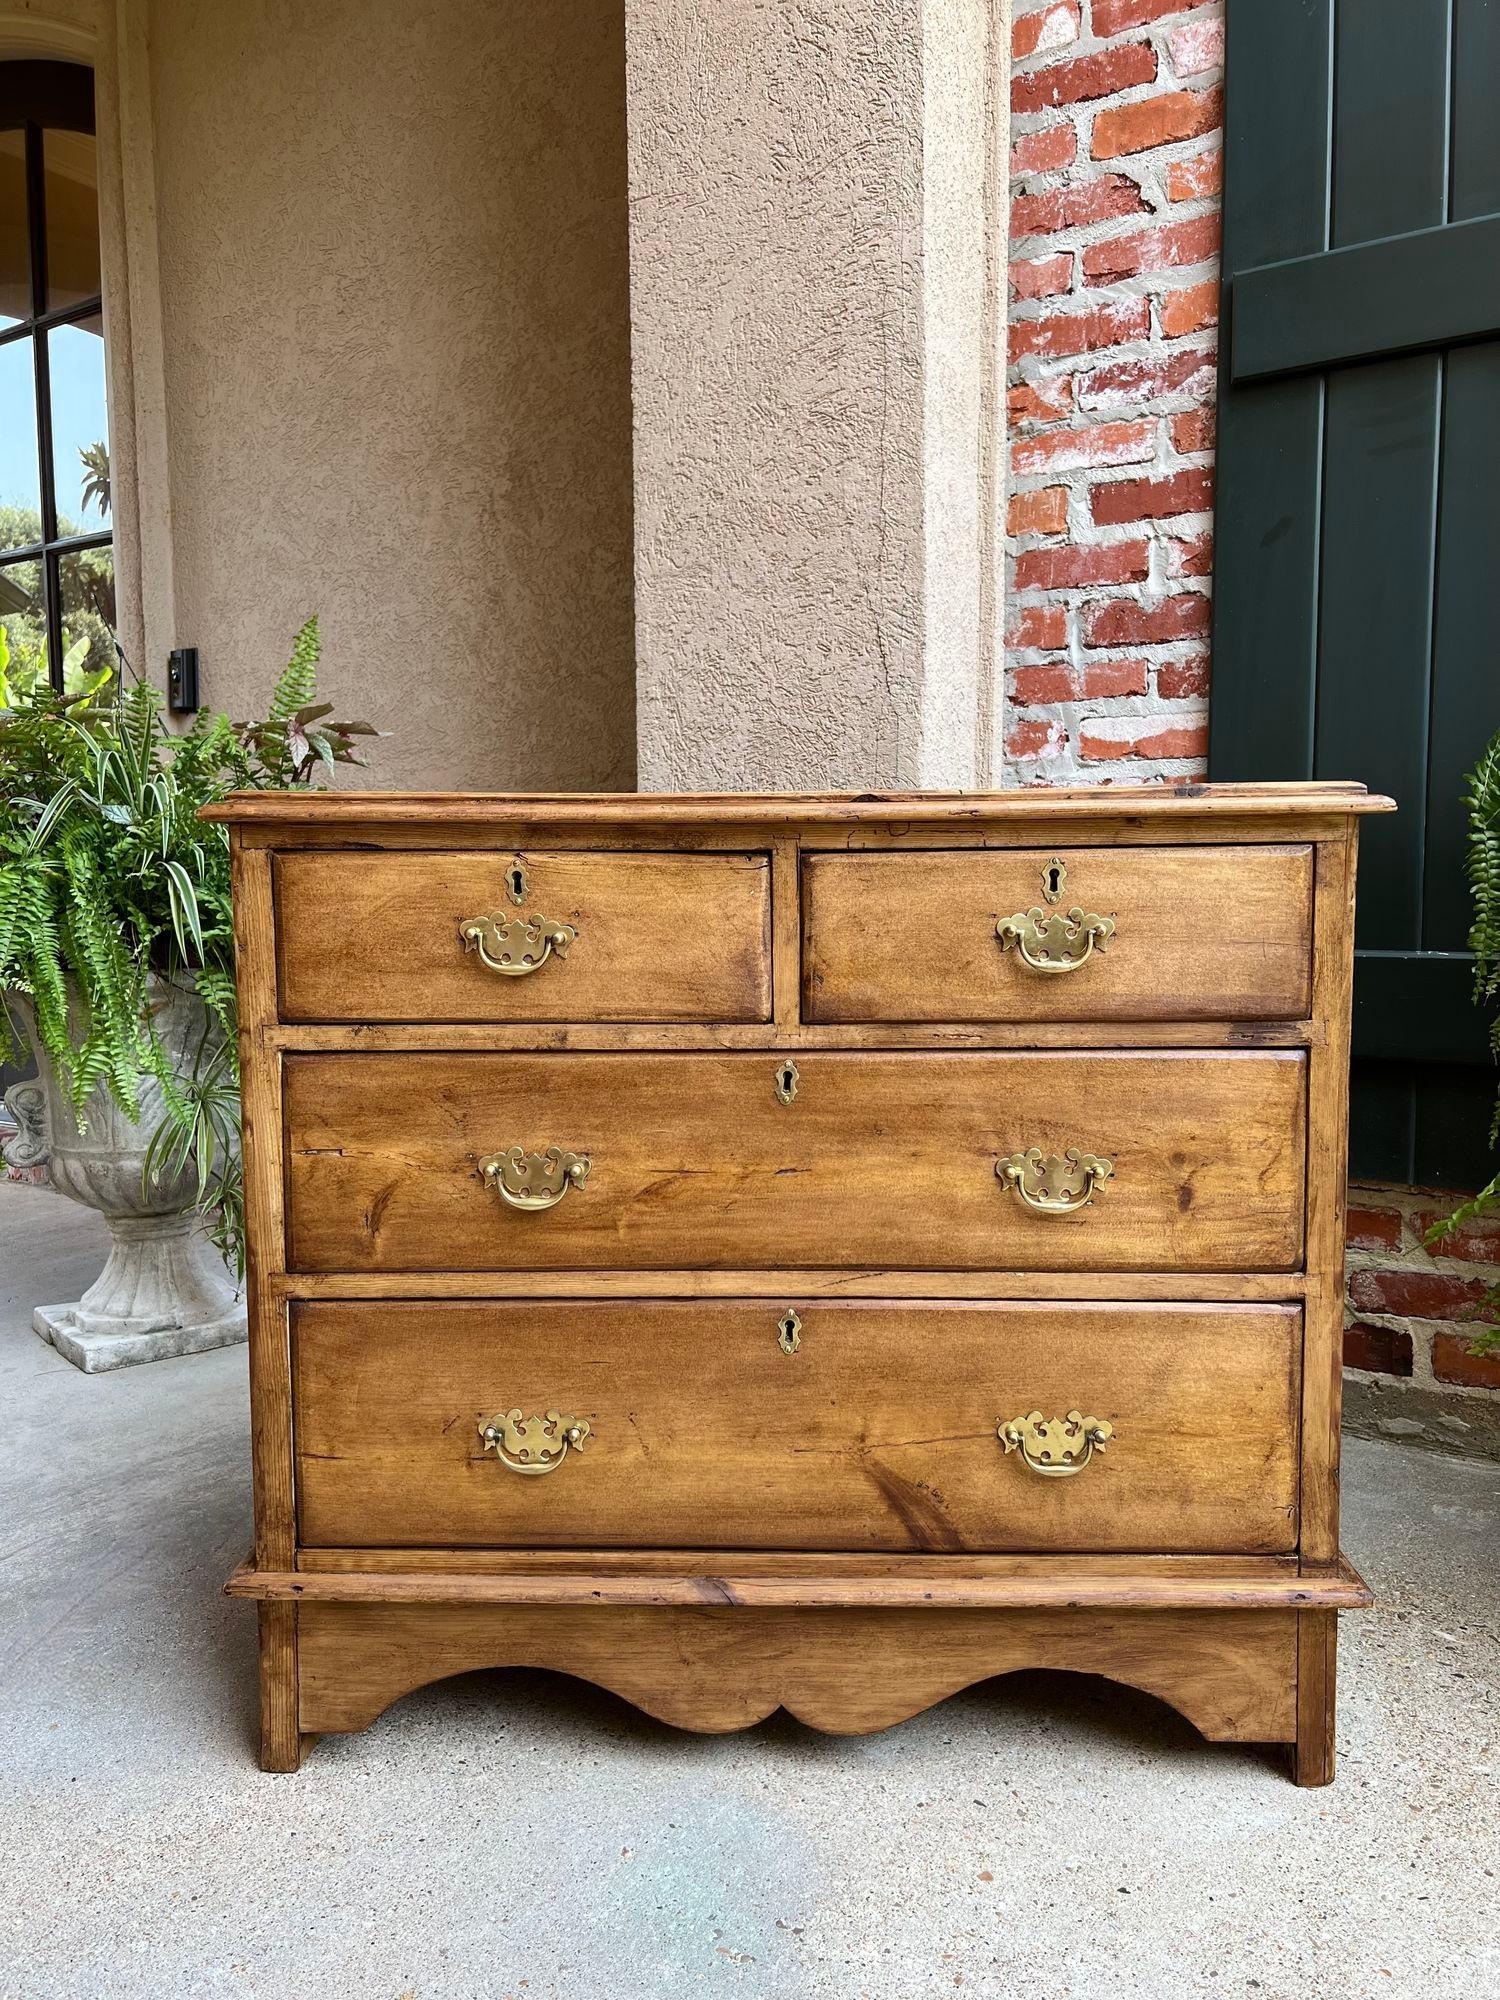 Antique English Waxed Pine Chest 4 Drawer Cabinet Sofa Table British Farmhouse.

Direct from England, a lovely antique waxed pine chest, in a versatile size, perfect for use anywhere from a foyer to farmhouse kitchen or bedroom, with plenty of